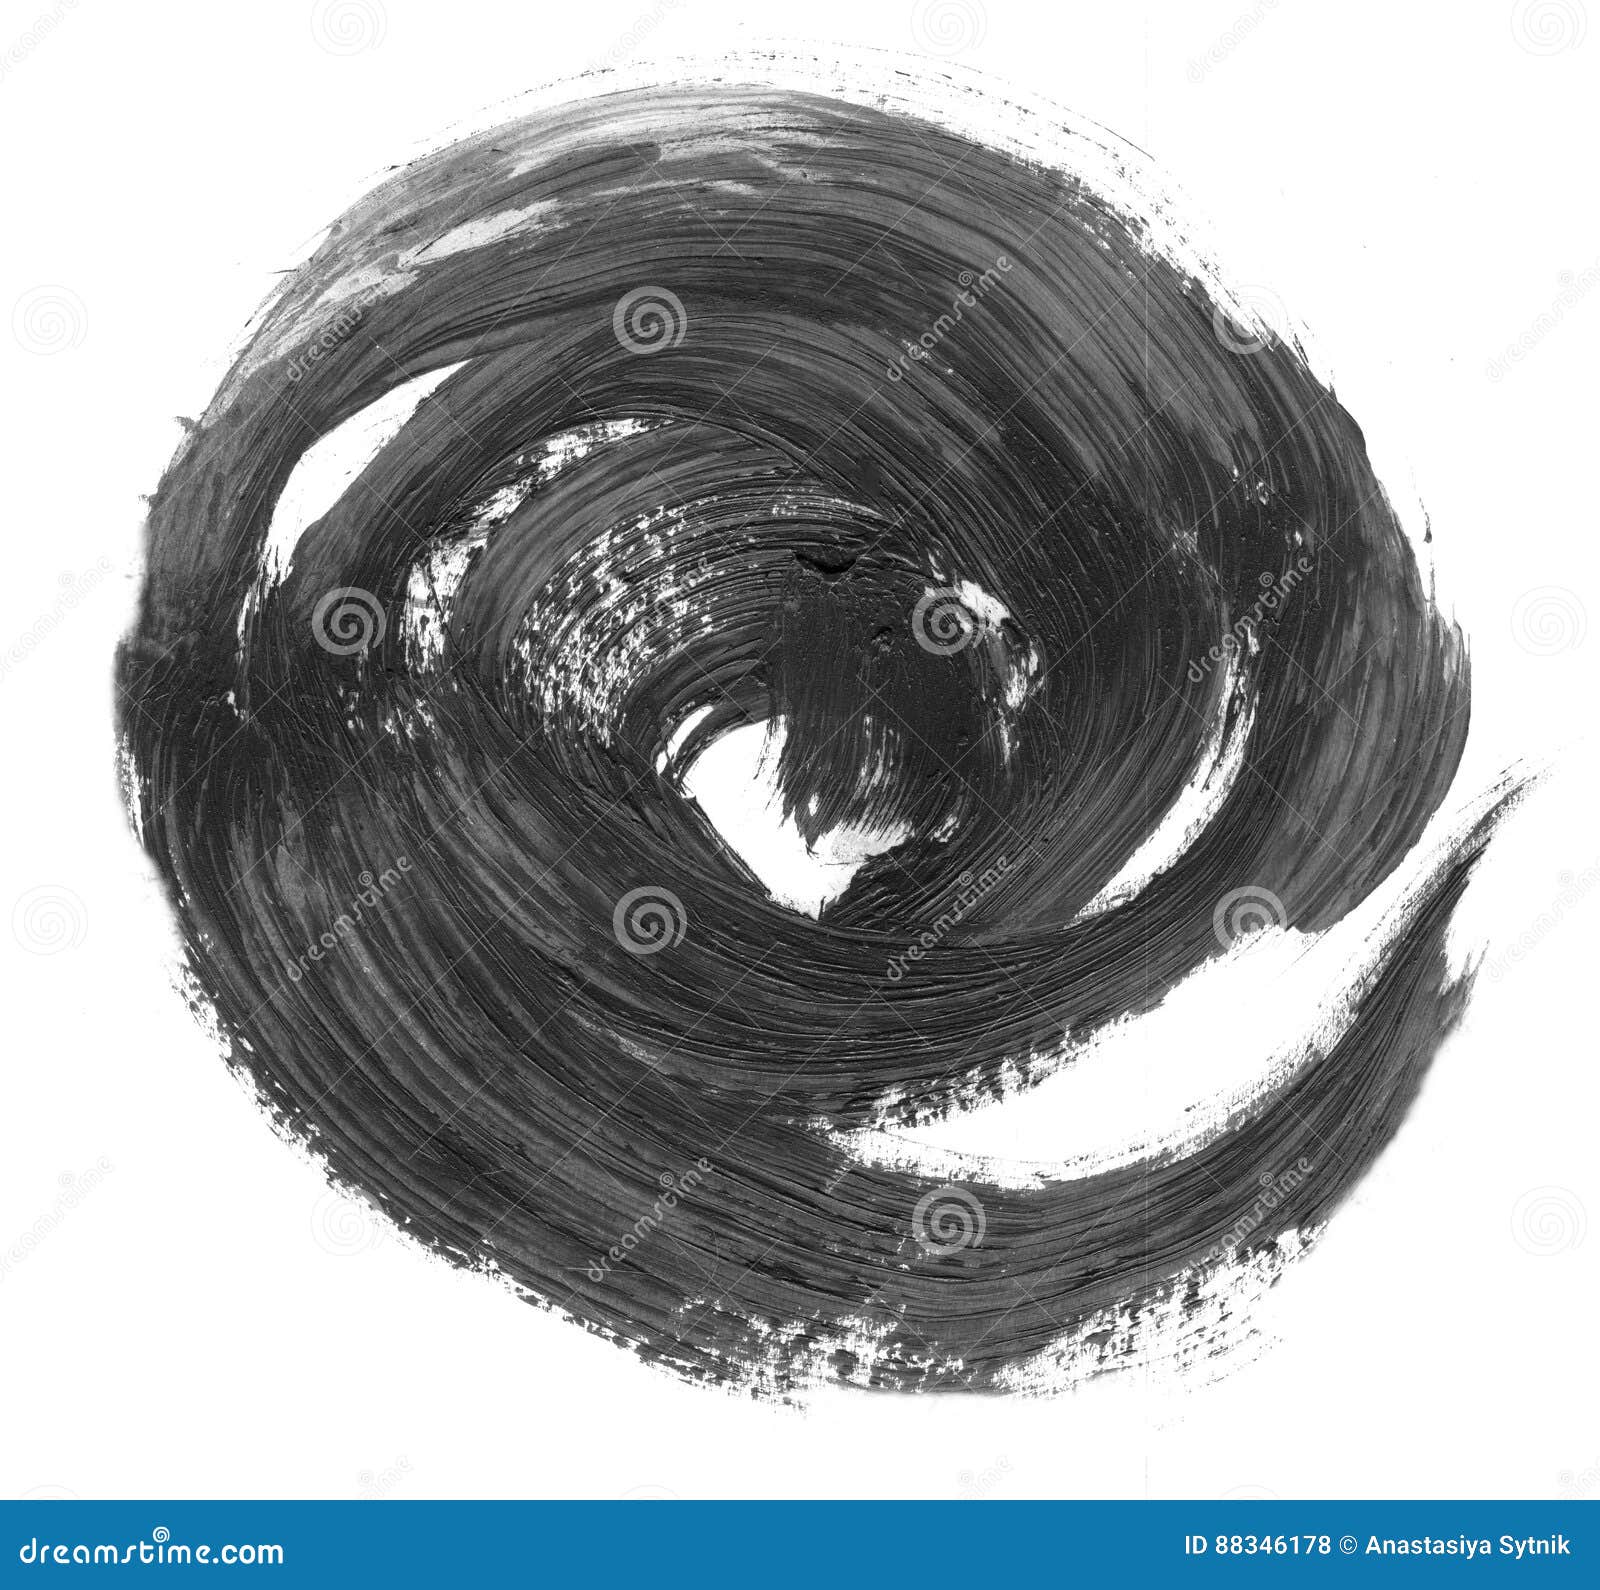 very hight resolution. black handdrawn oil circle realistic strokes banners